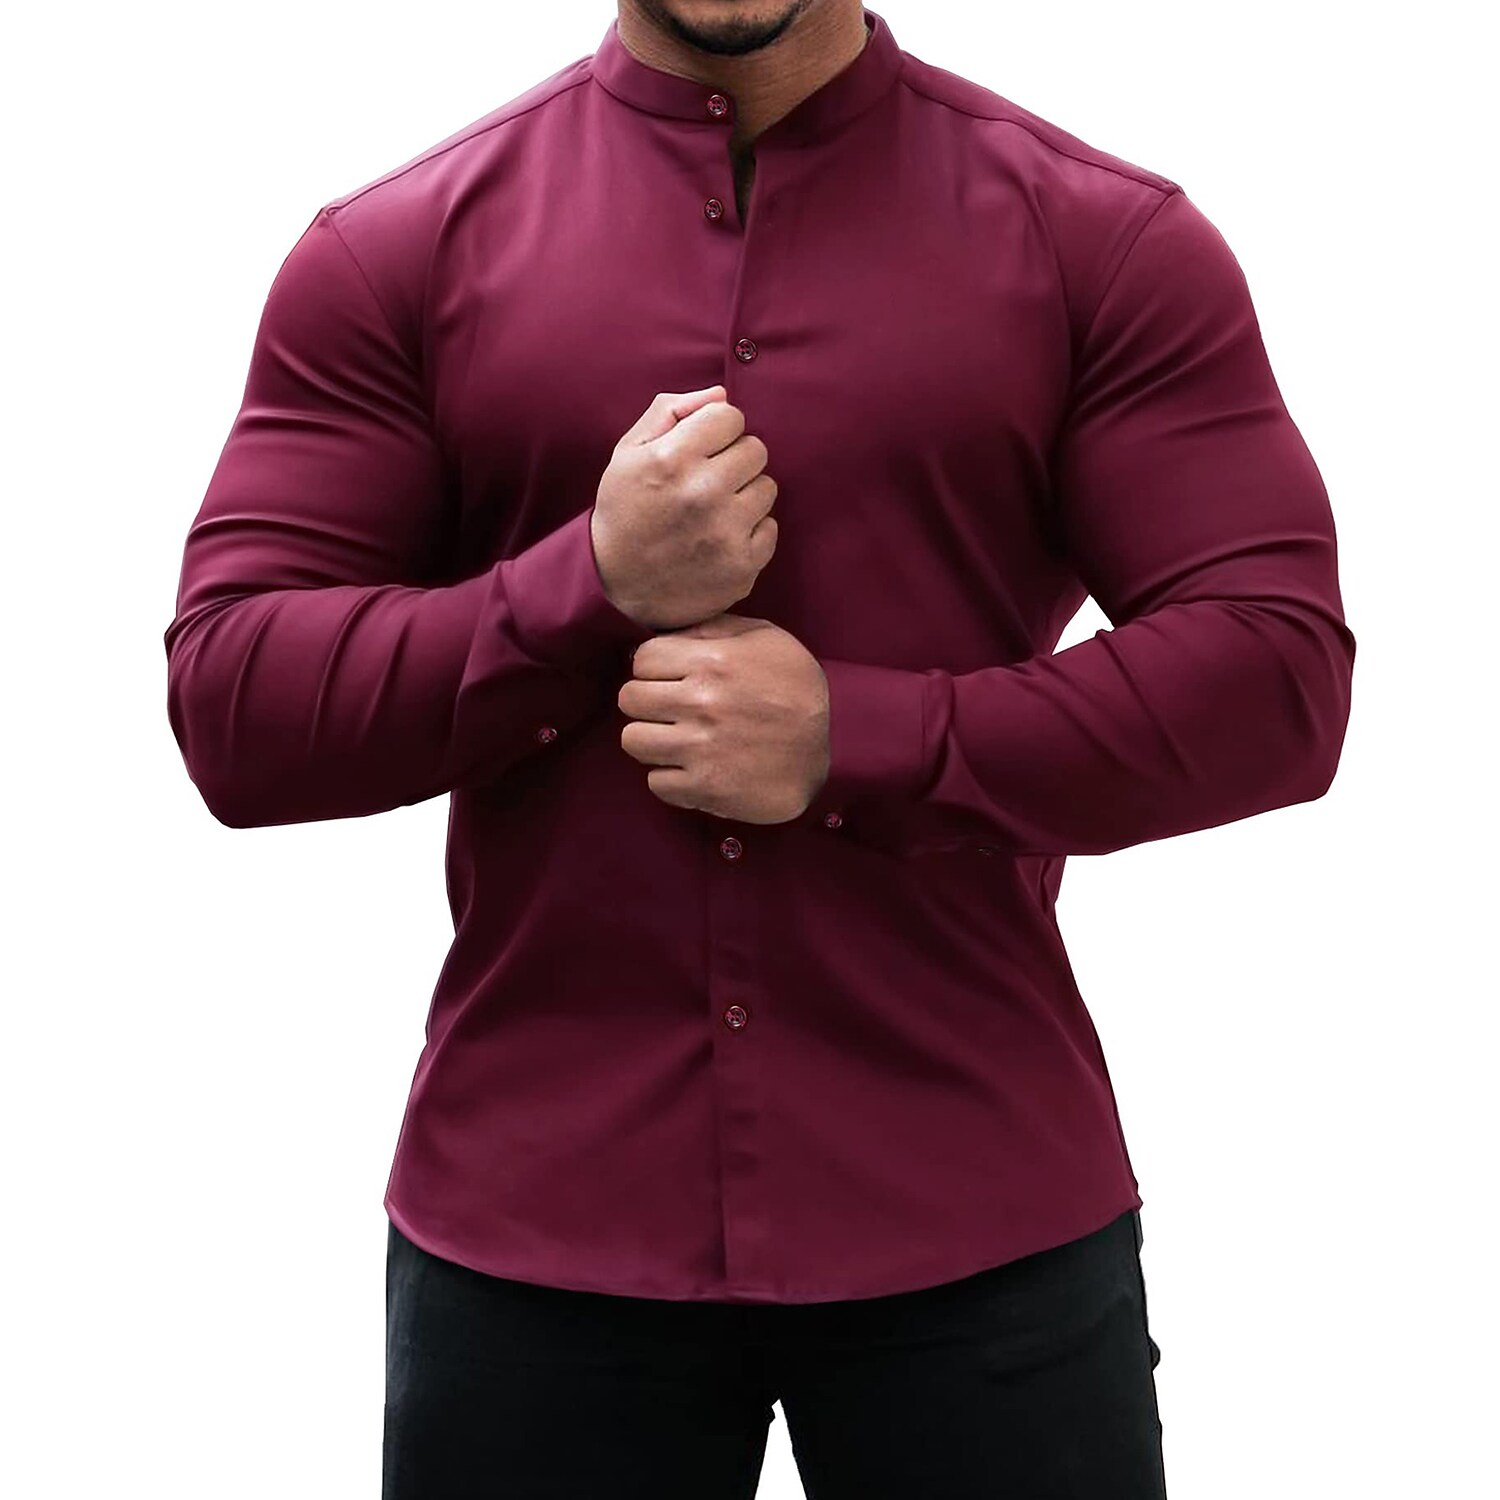 Men's Collar Polo Shirt Casual Shirt Plain Stand Collar Wine Green Khaki White Black Daily Long Sleeve Patchwork Clothing Apparel Muscle